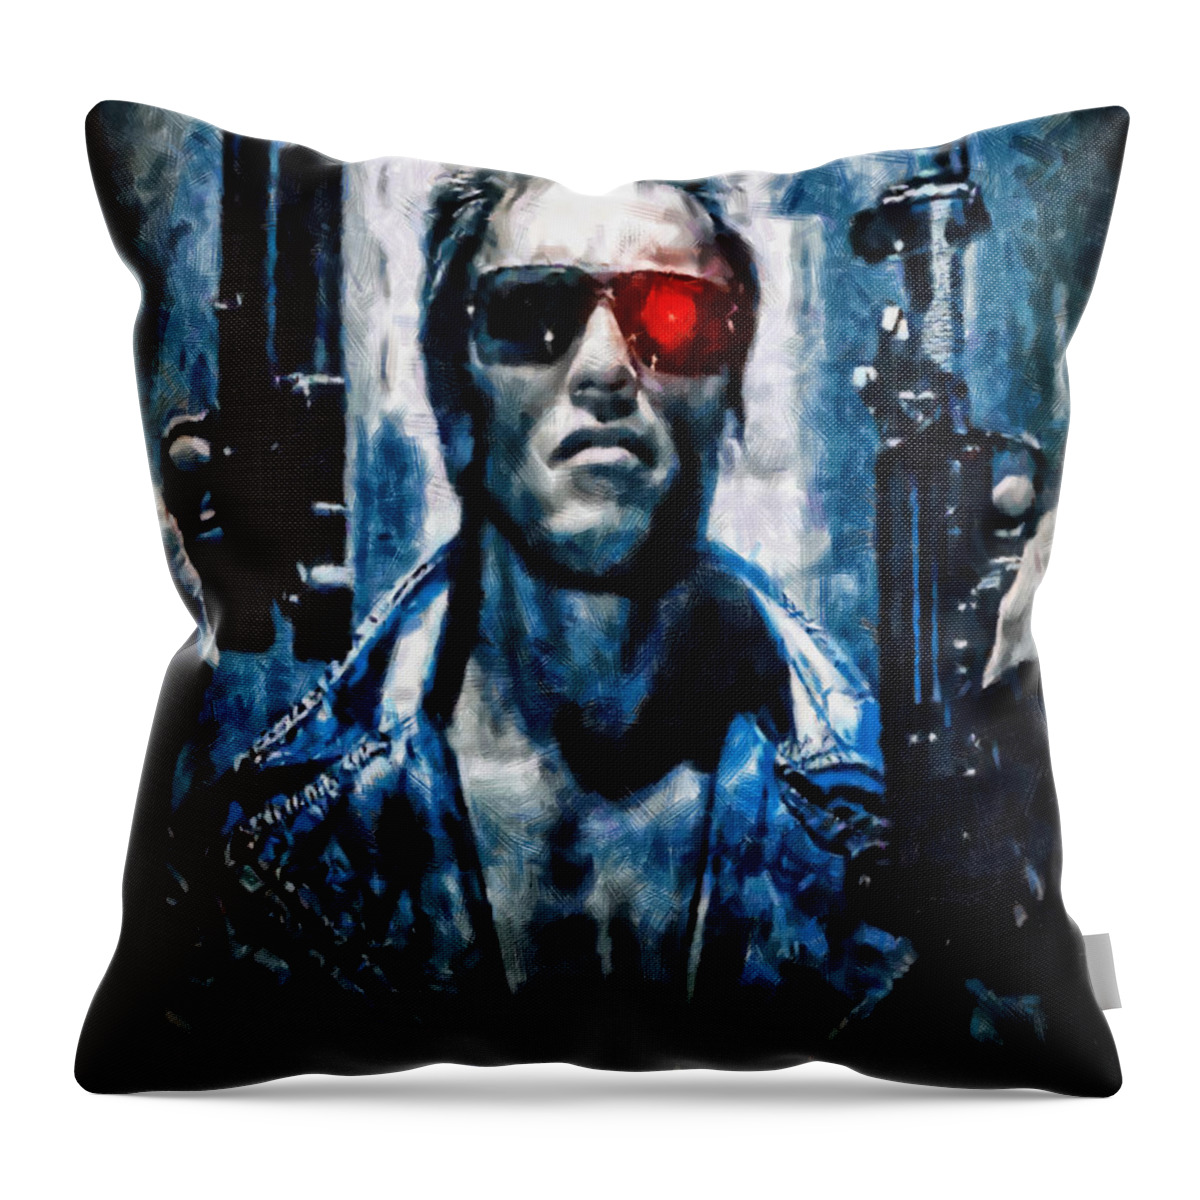 Www.themidnightstreets.net Throw Pillow featuring the painting T800 Terminator by Joe Misrasi